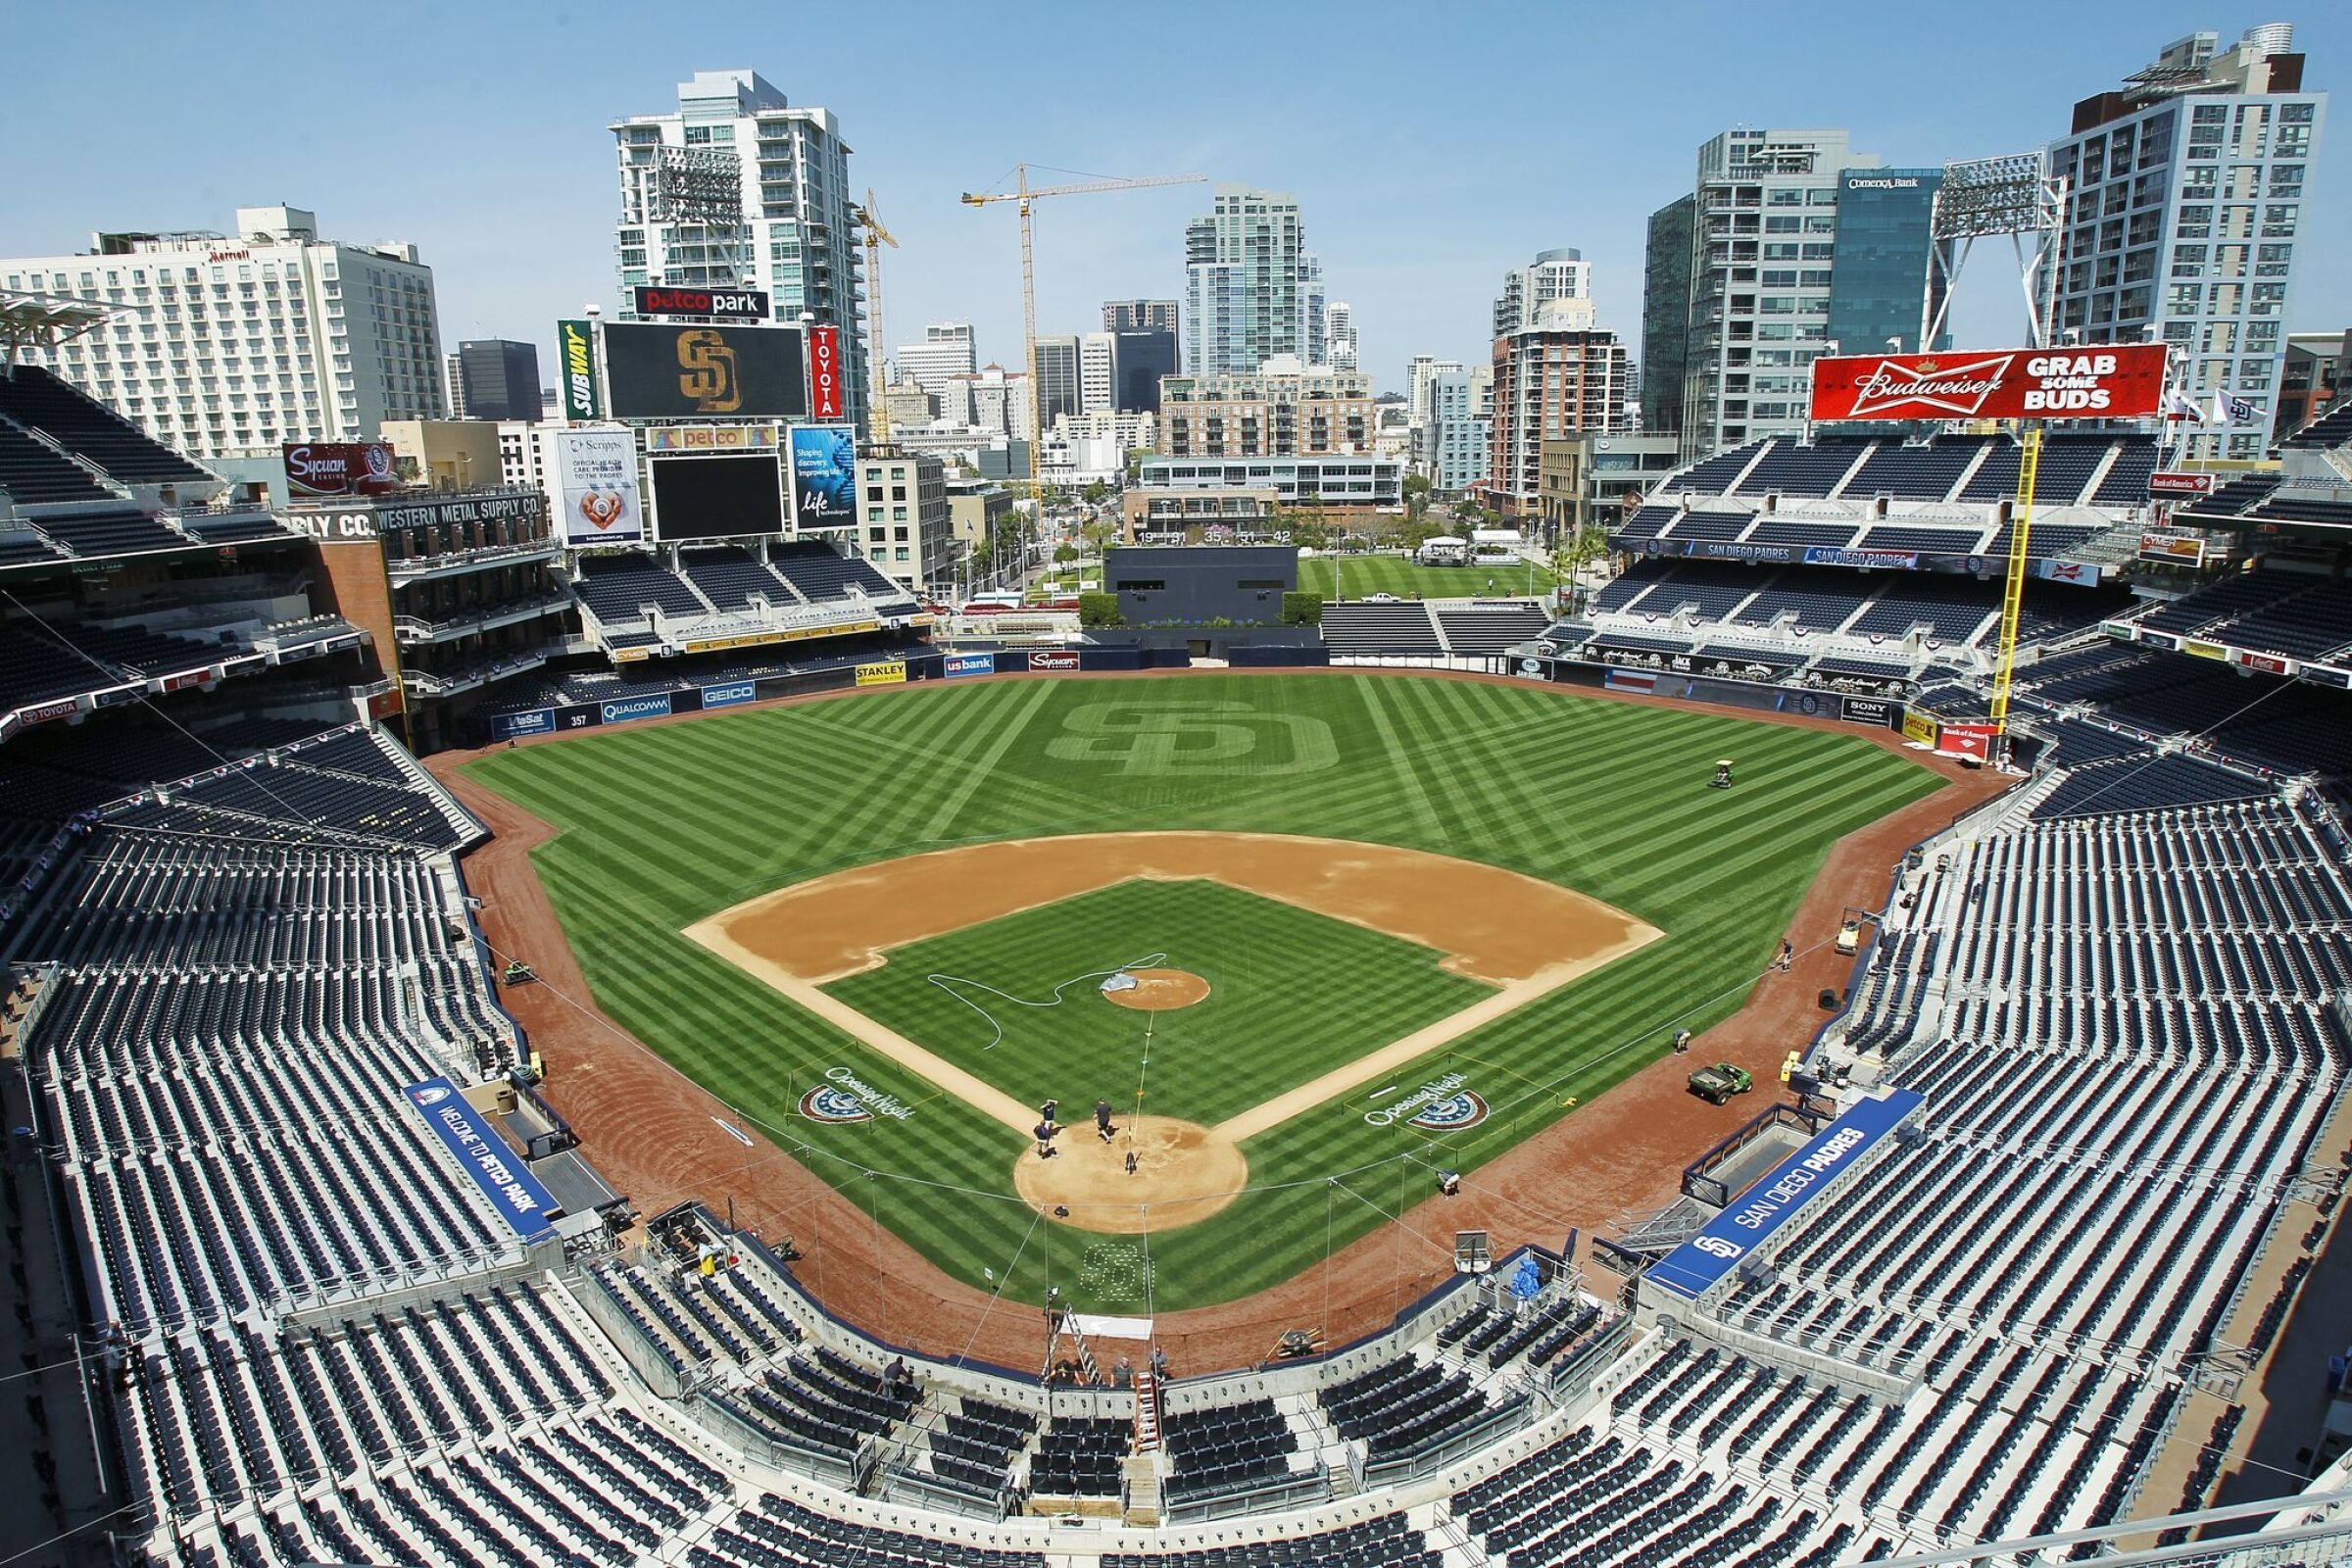 Petco Park was being prepared for the Padres opening week.